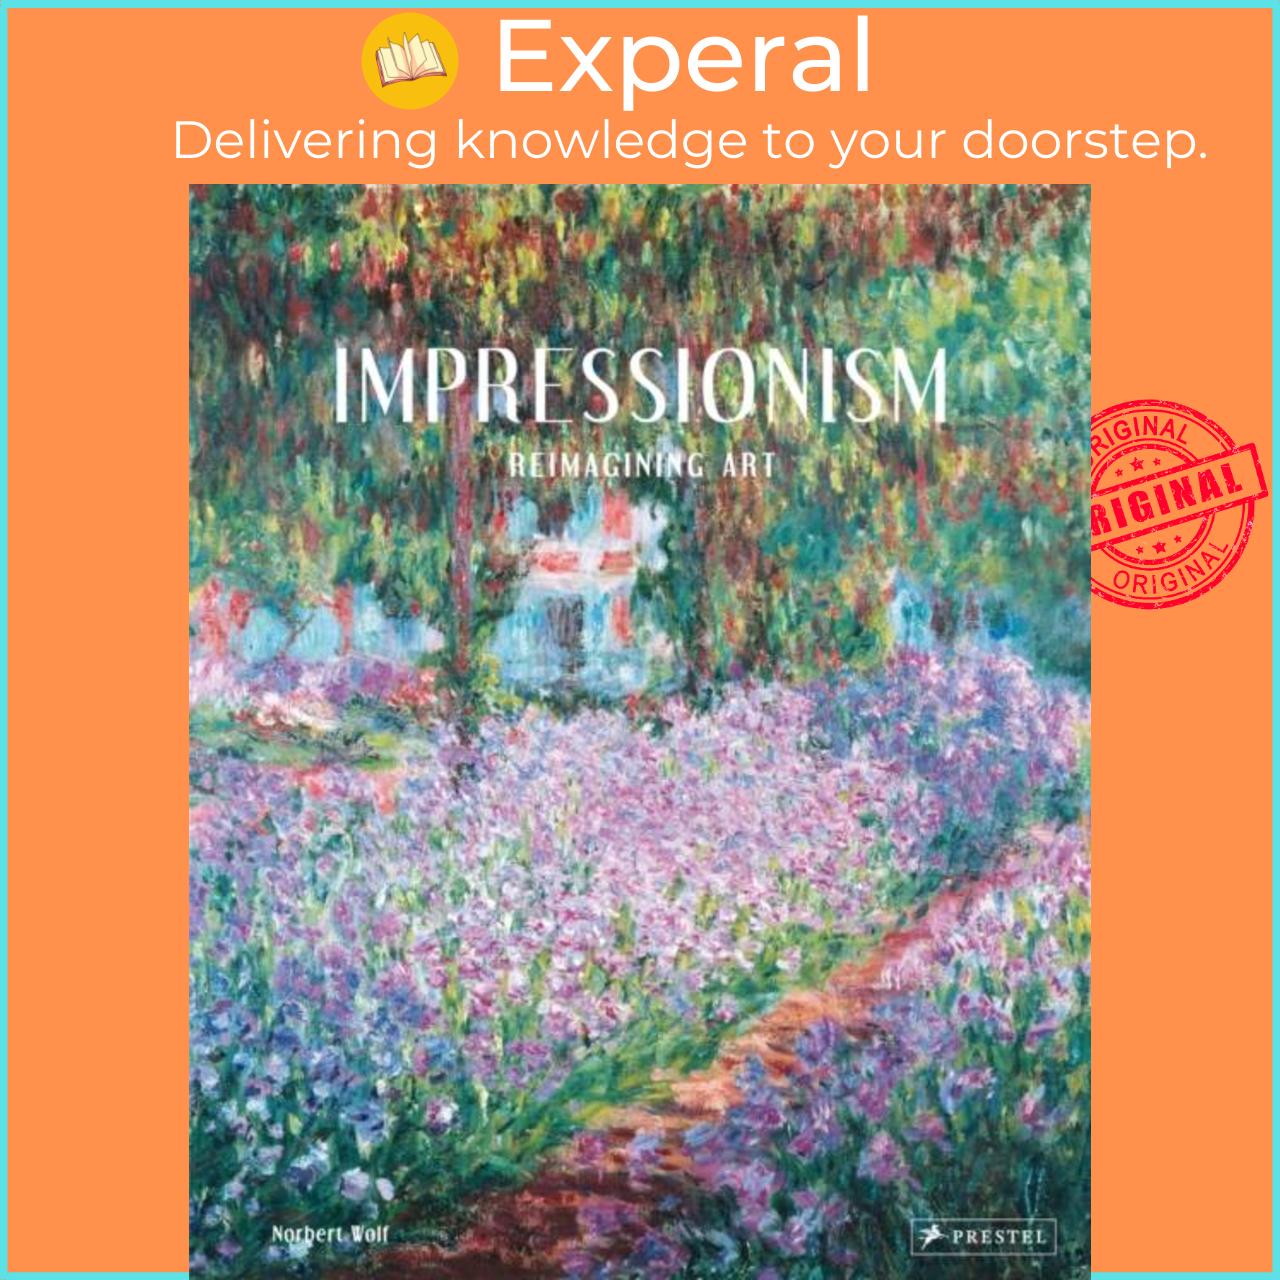 Sách - Impressionism by Norbert Wolf (UK edition, hardcover)